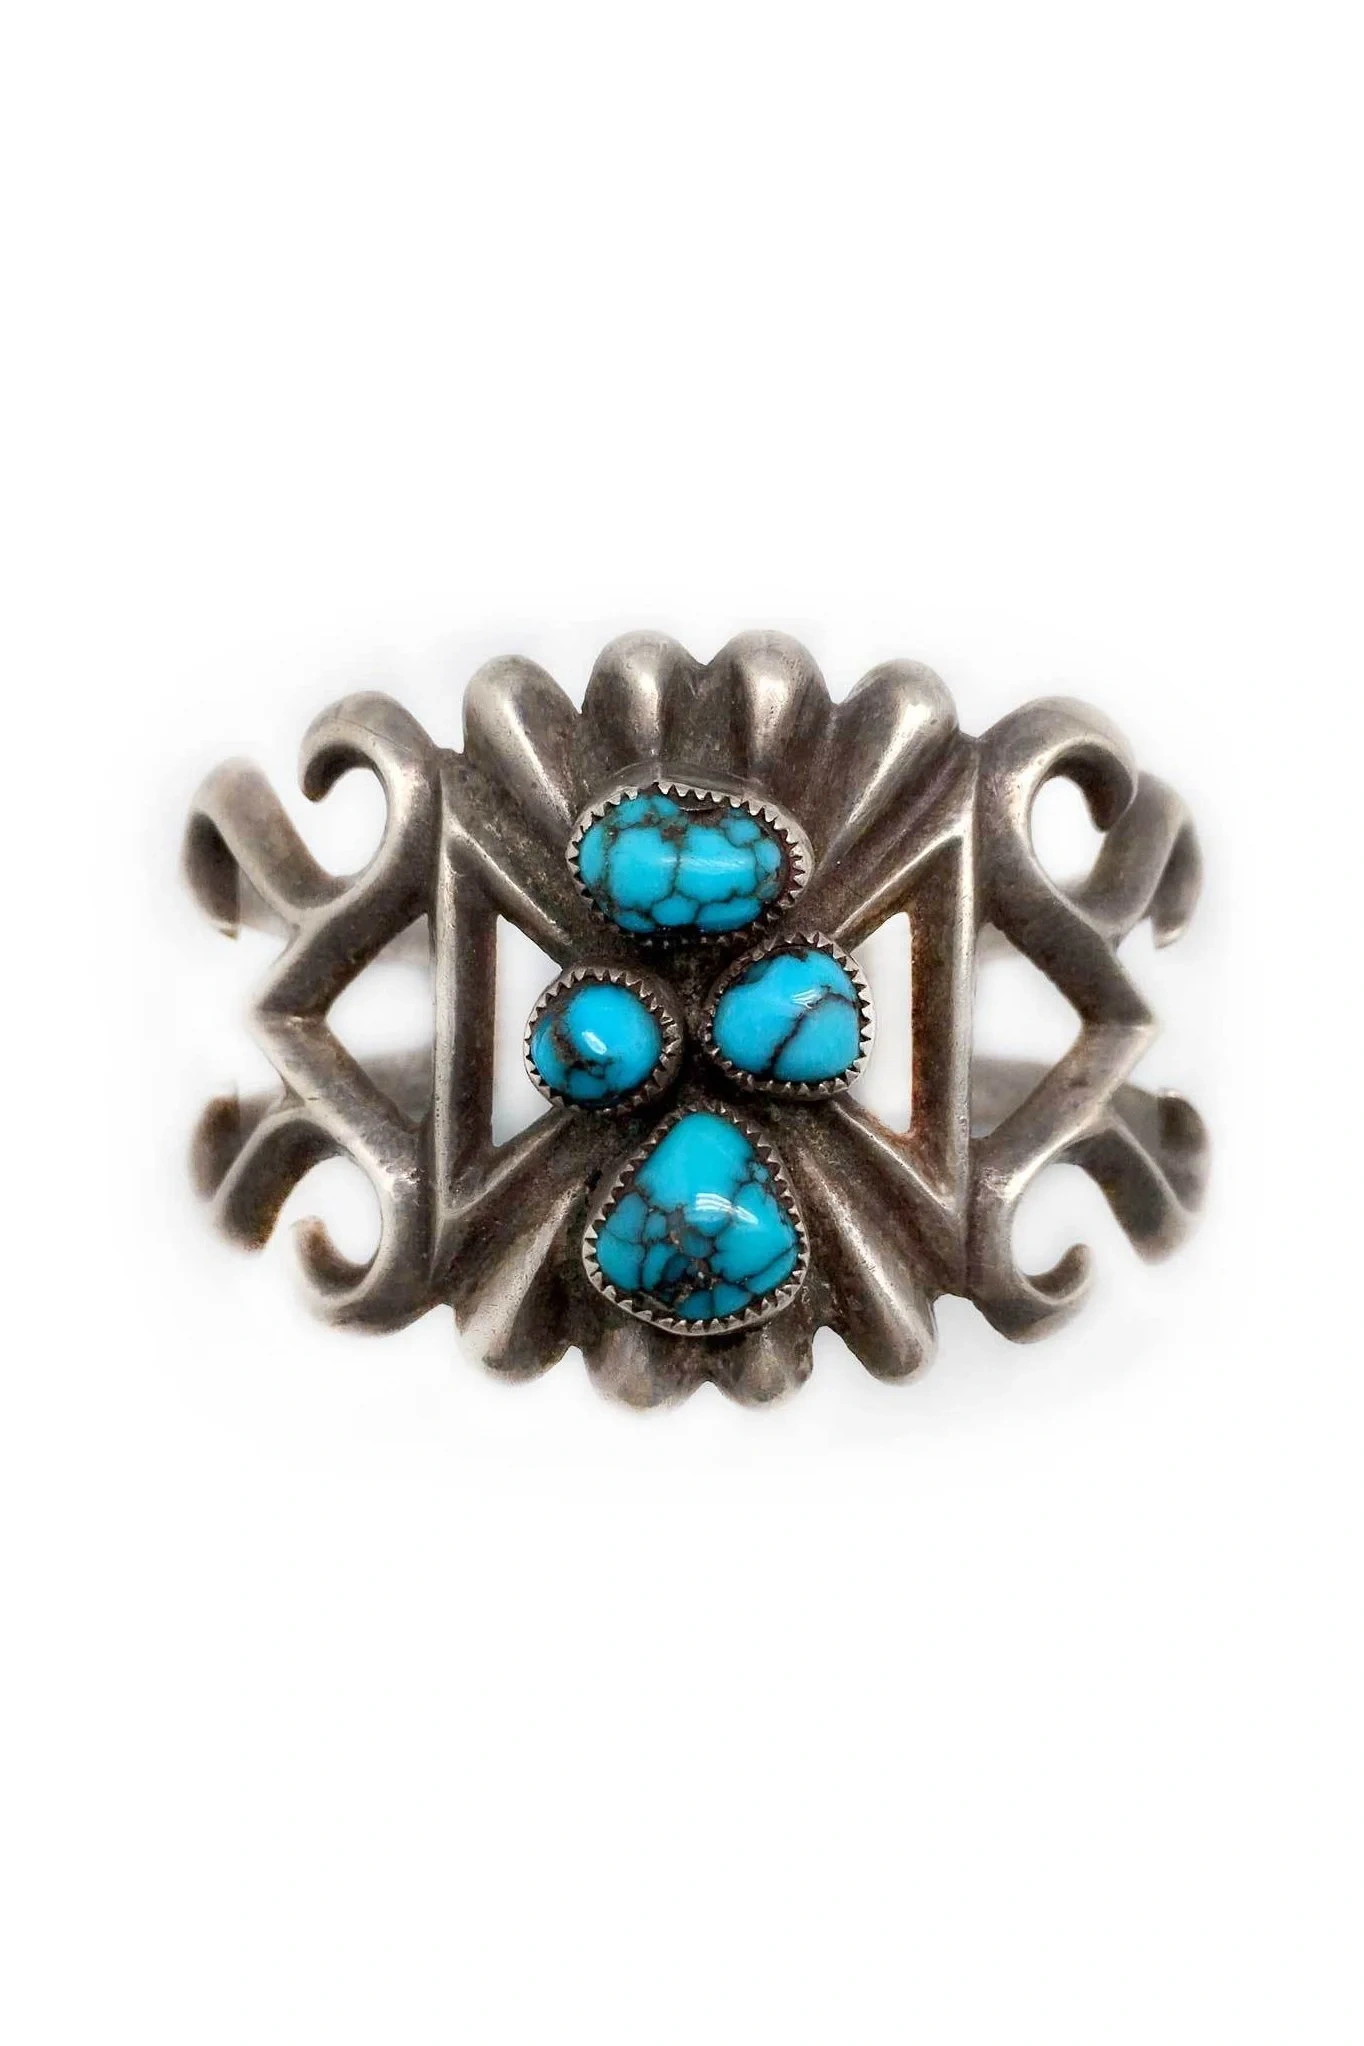 Cuff, Turquoise, 4 Stone, Vintage, 1950's, 2005